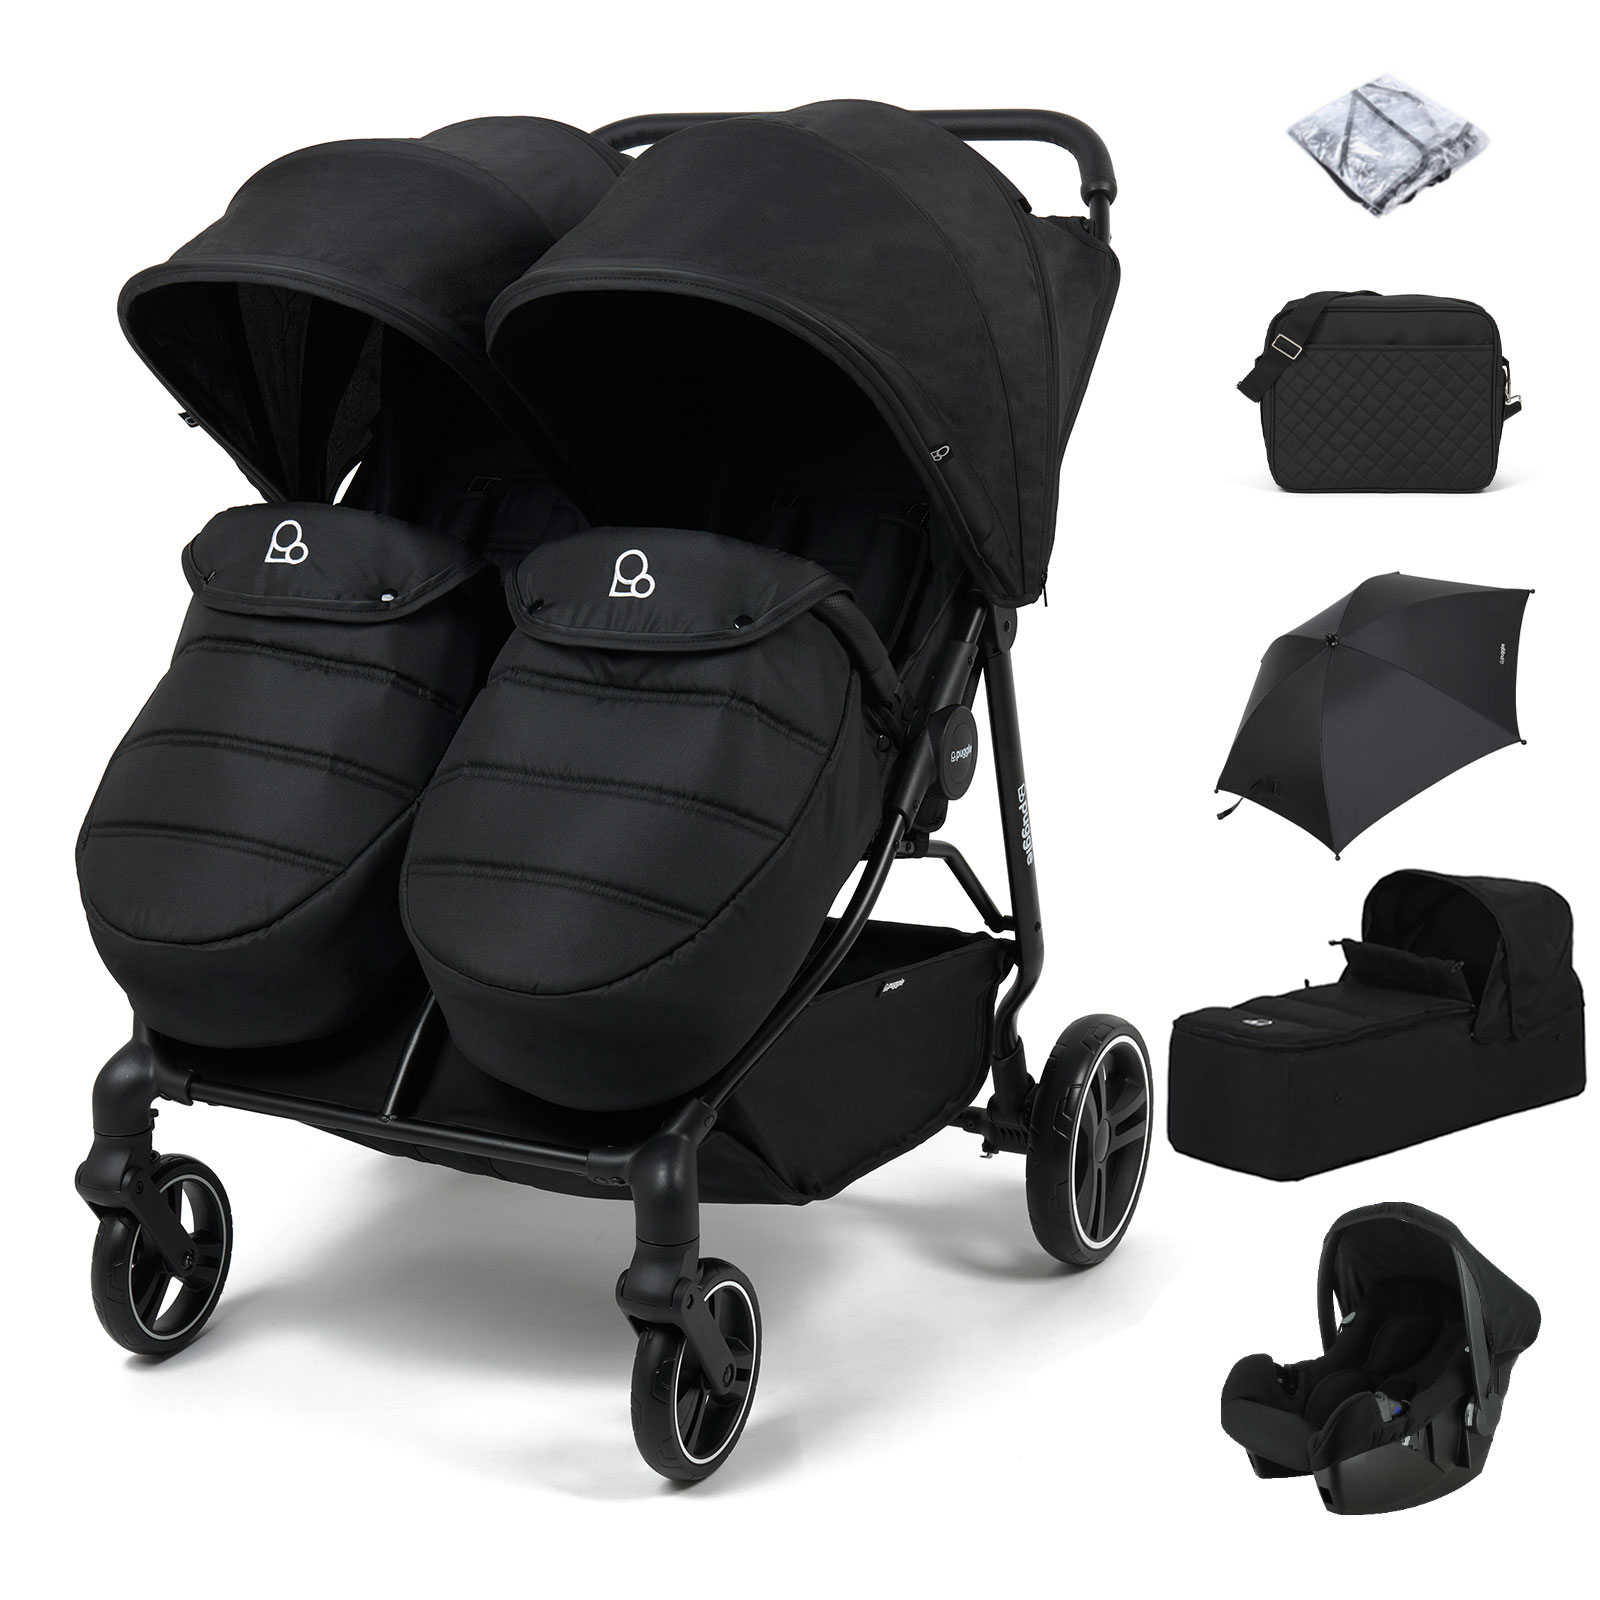 Puggle Urban City Easyfold Twin Pushchair with Footmuffs, Beone Car Seat, Soft Carrycot, Parasol & Changing Bag - Storm Black